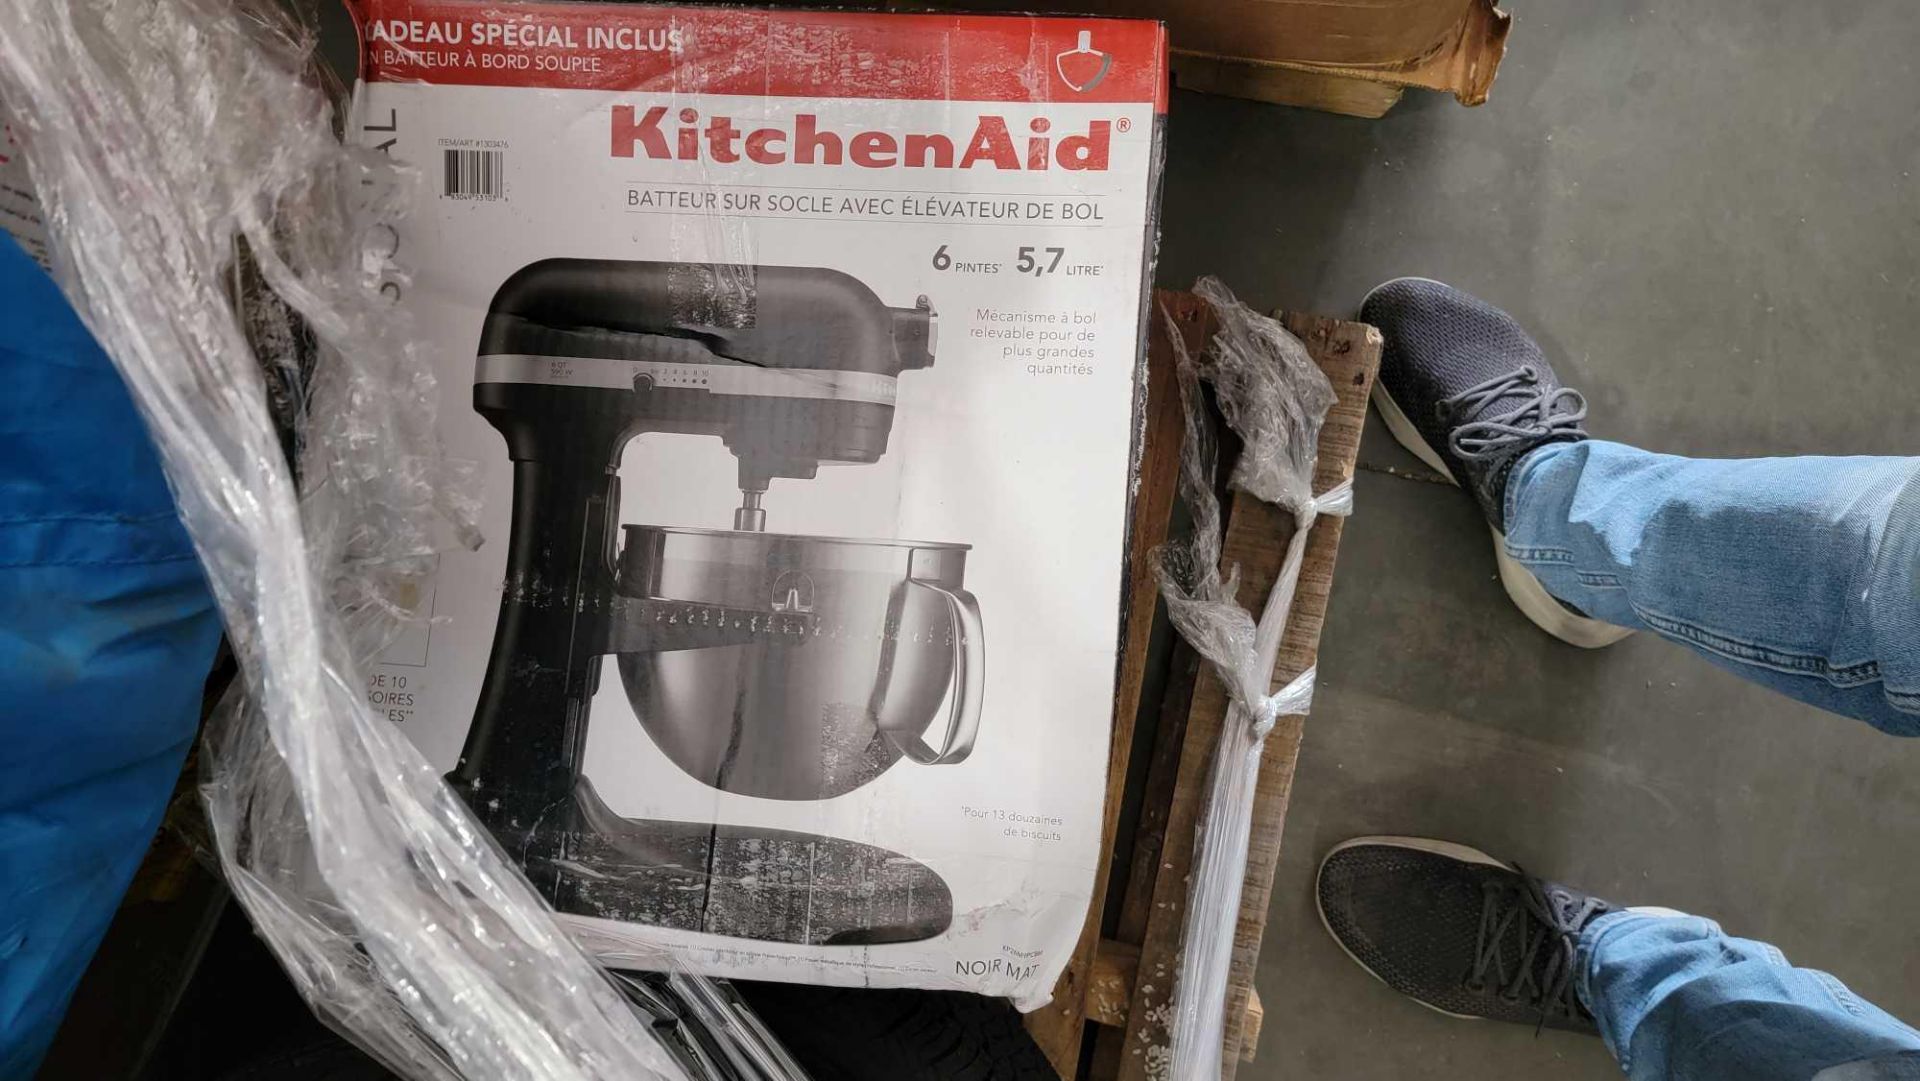 Kitchenaid professional stand mixer and more - Image 3 of 5